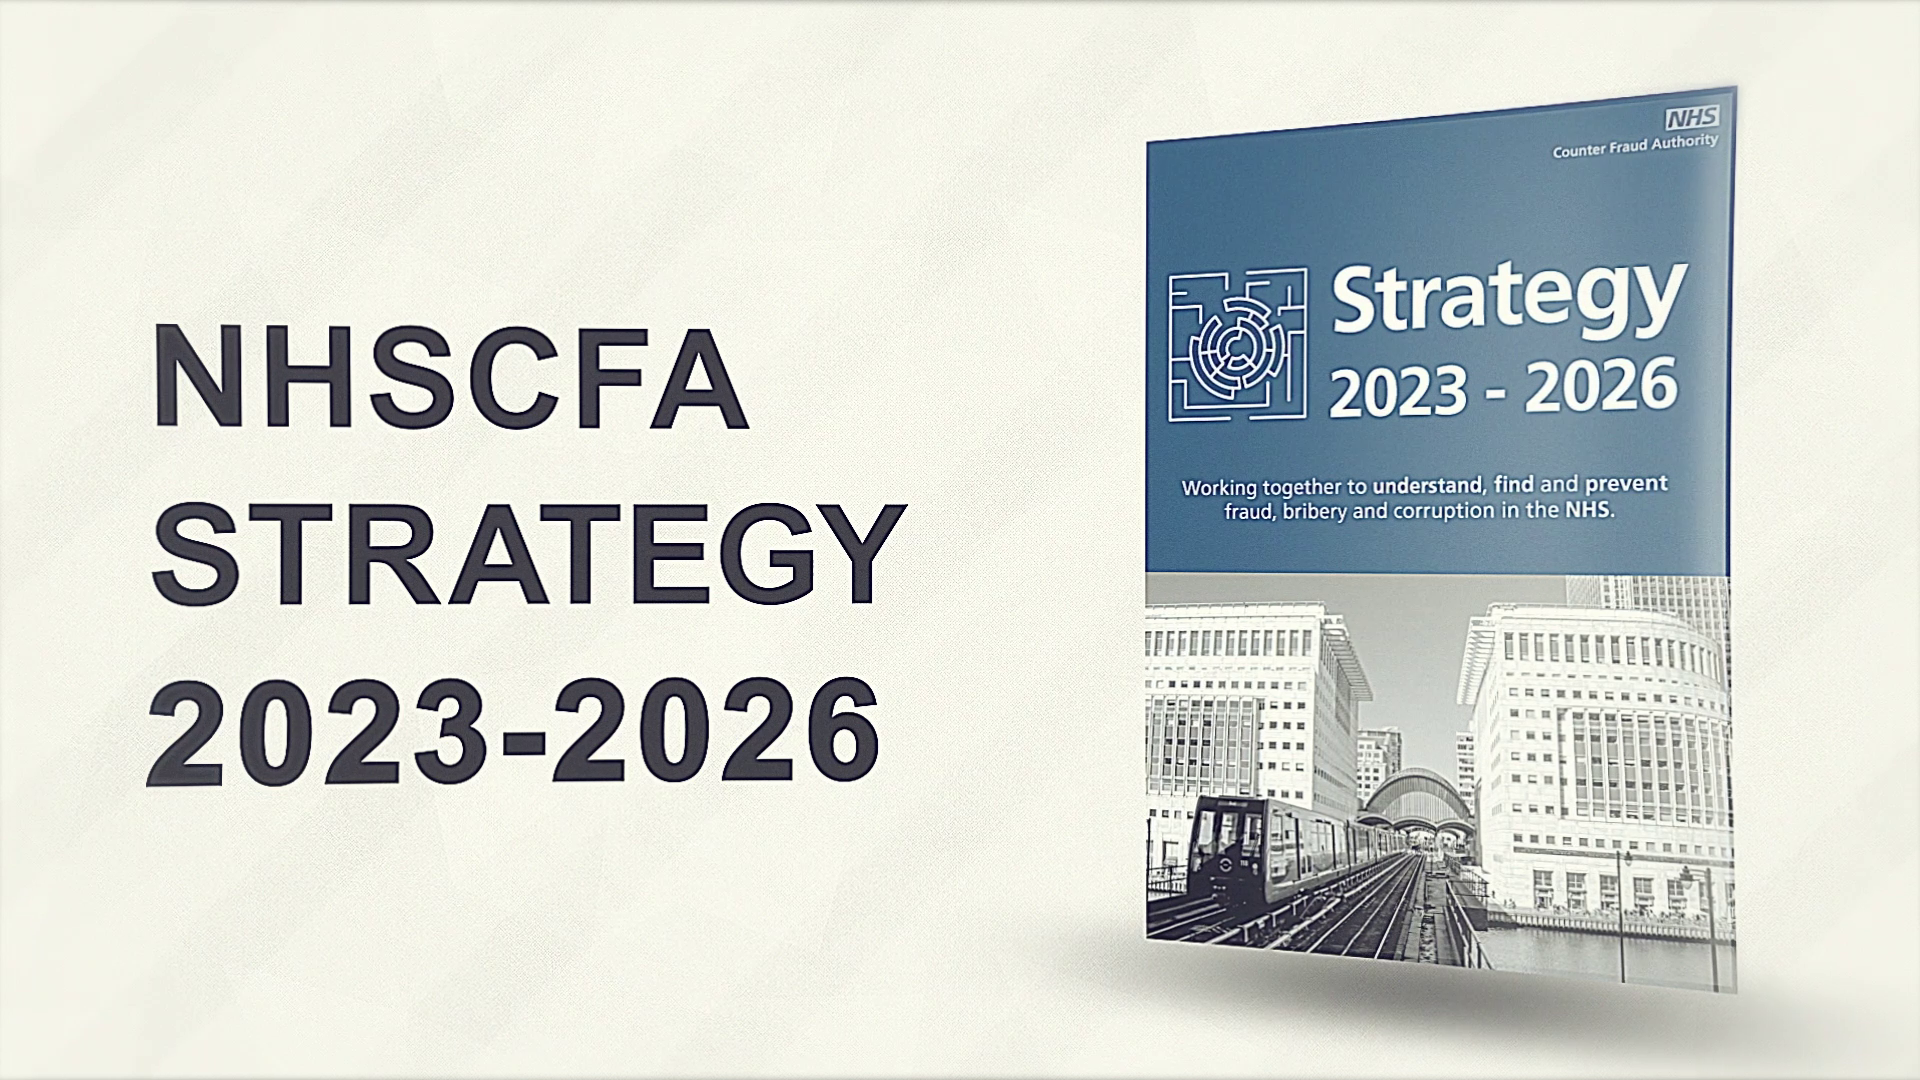 Image showing banner with the text NHSCFA strategy 2023-2026